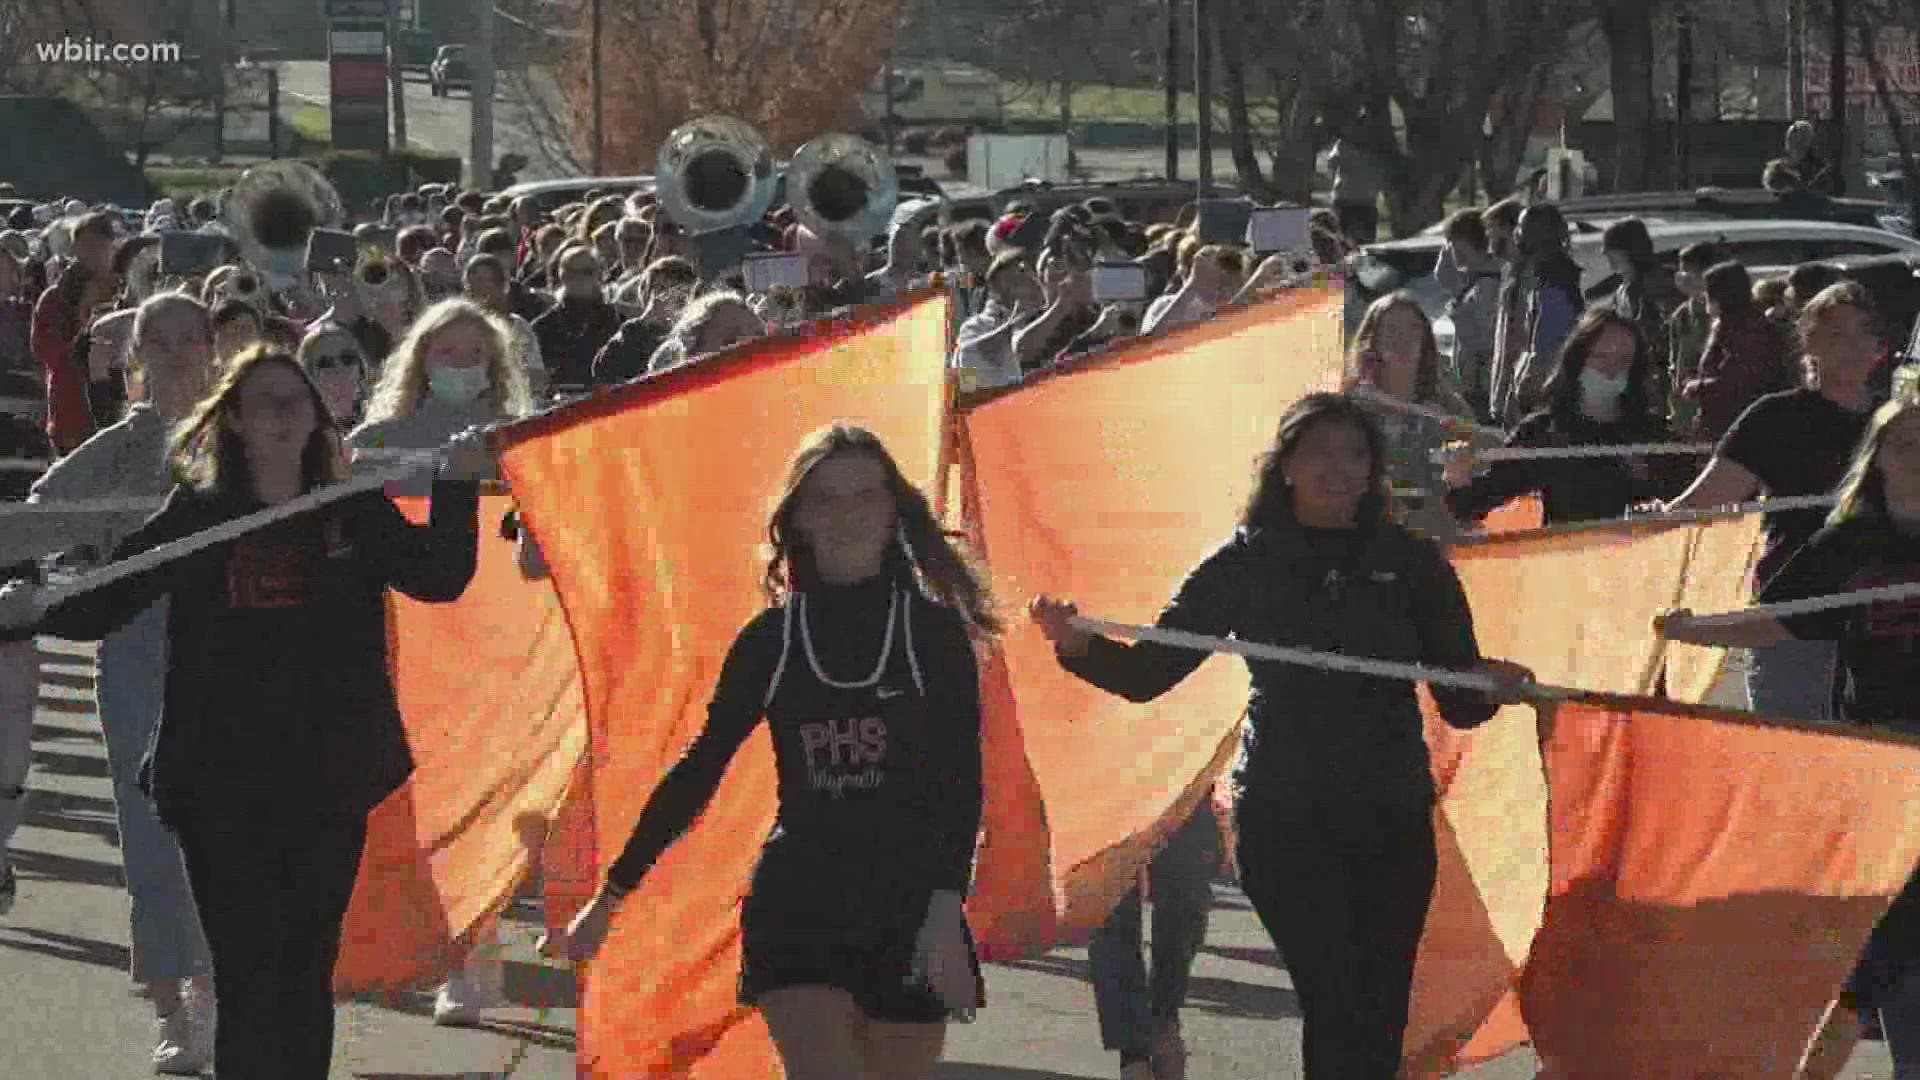 The school celebrated its first state title. The marching band led the team around the school with classmates watching on.